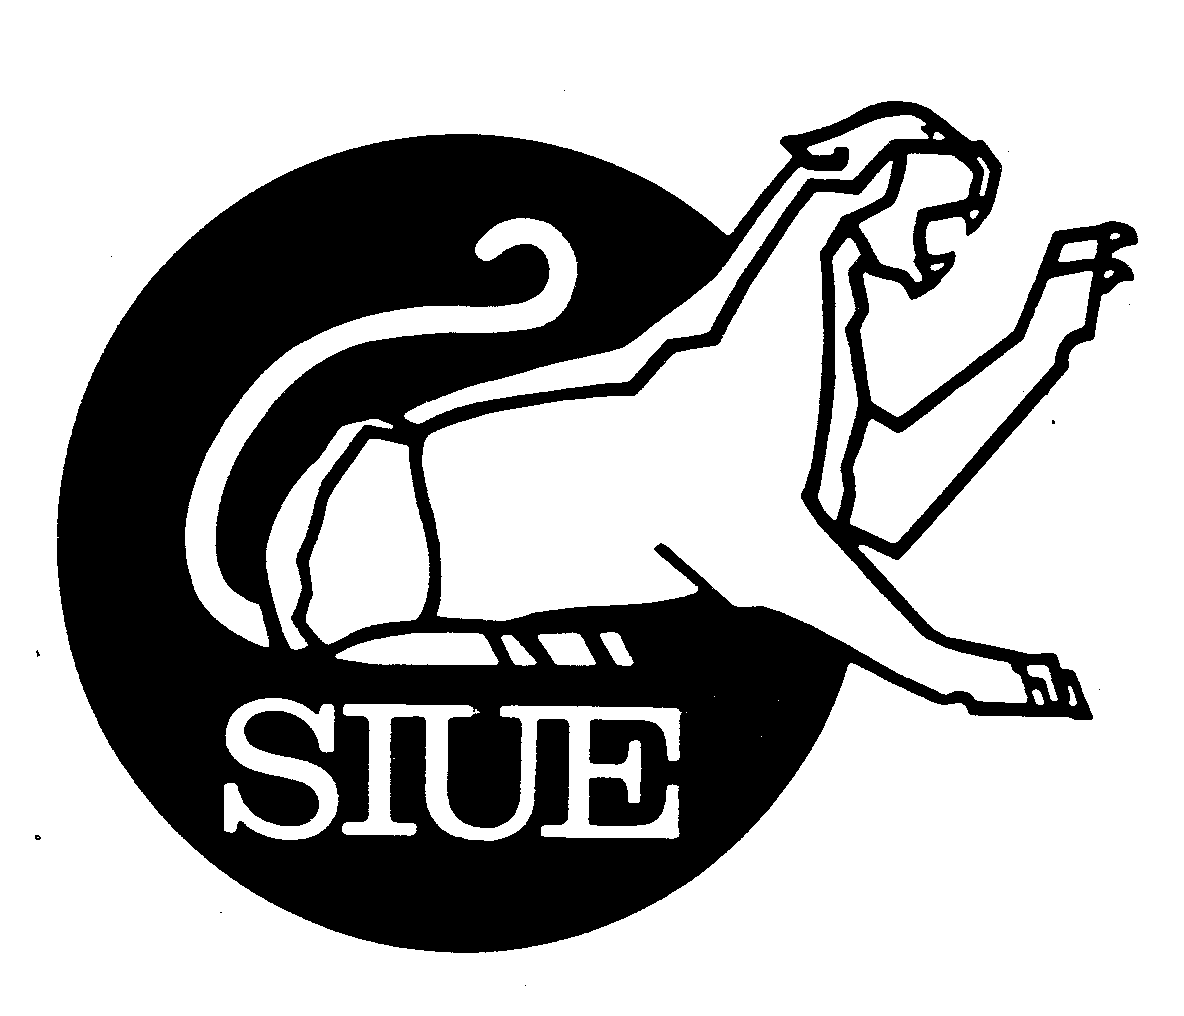  SIUE